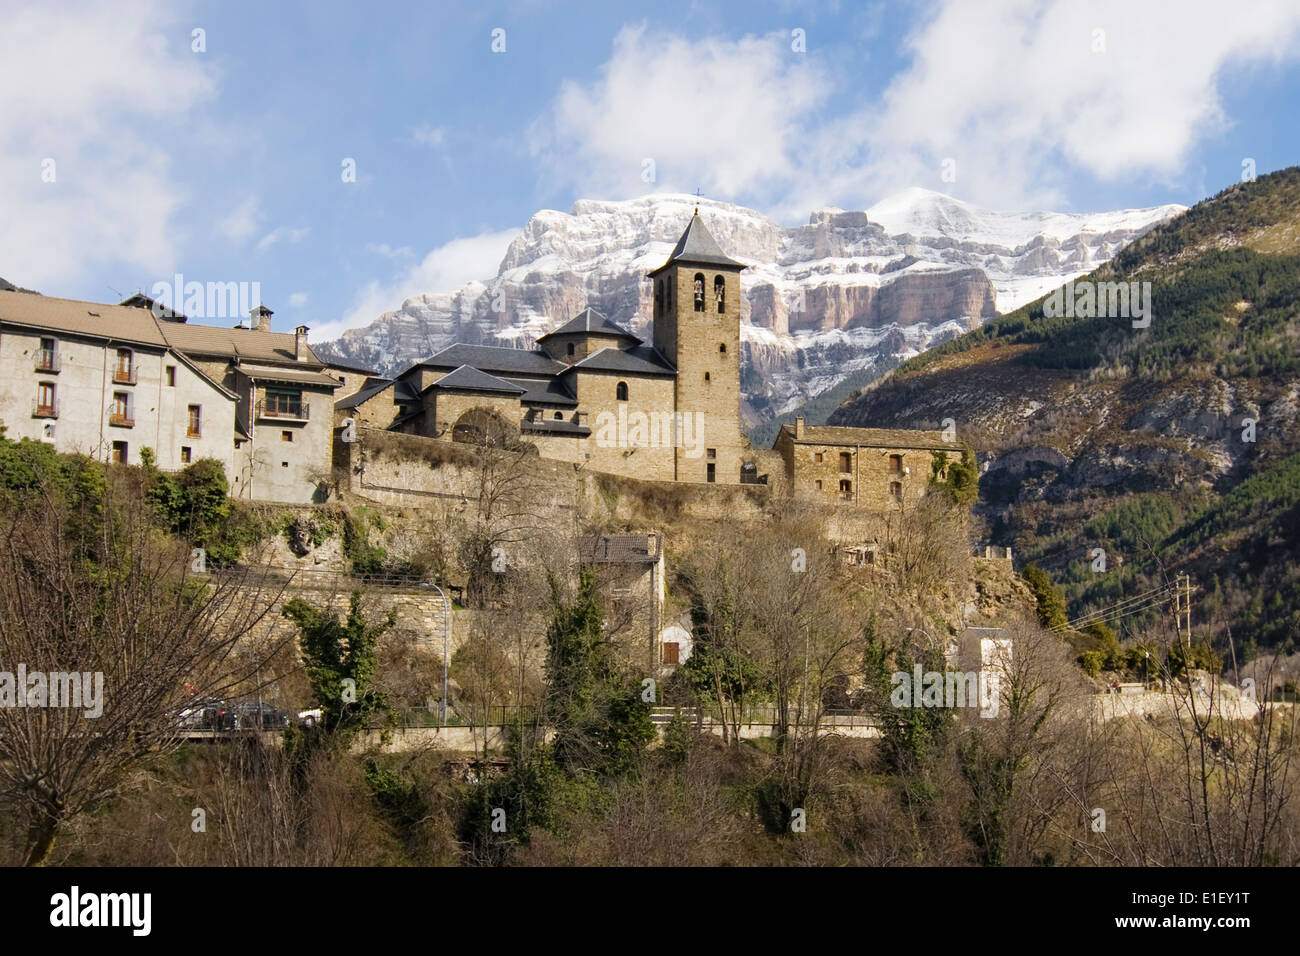 The old town of Torla and the Mondarruego mountain in the background, near the Ordesa Valley, Huesca, Aragon, Spain. Stock Photo